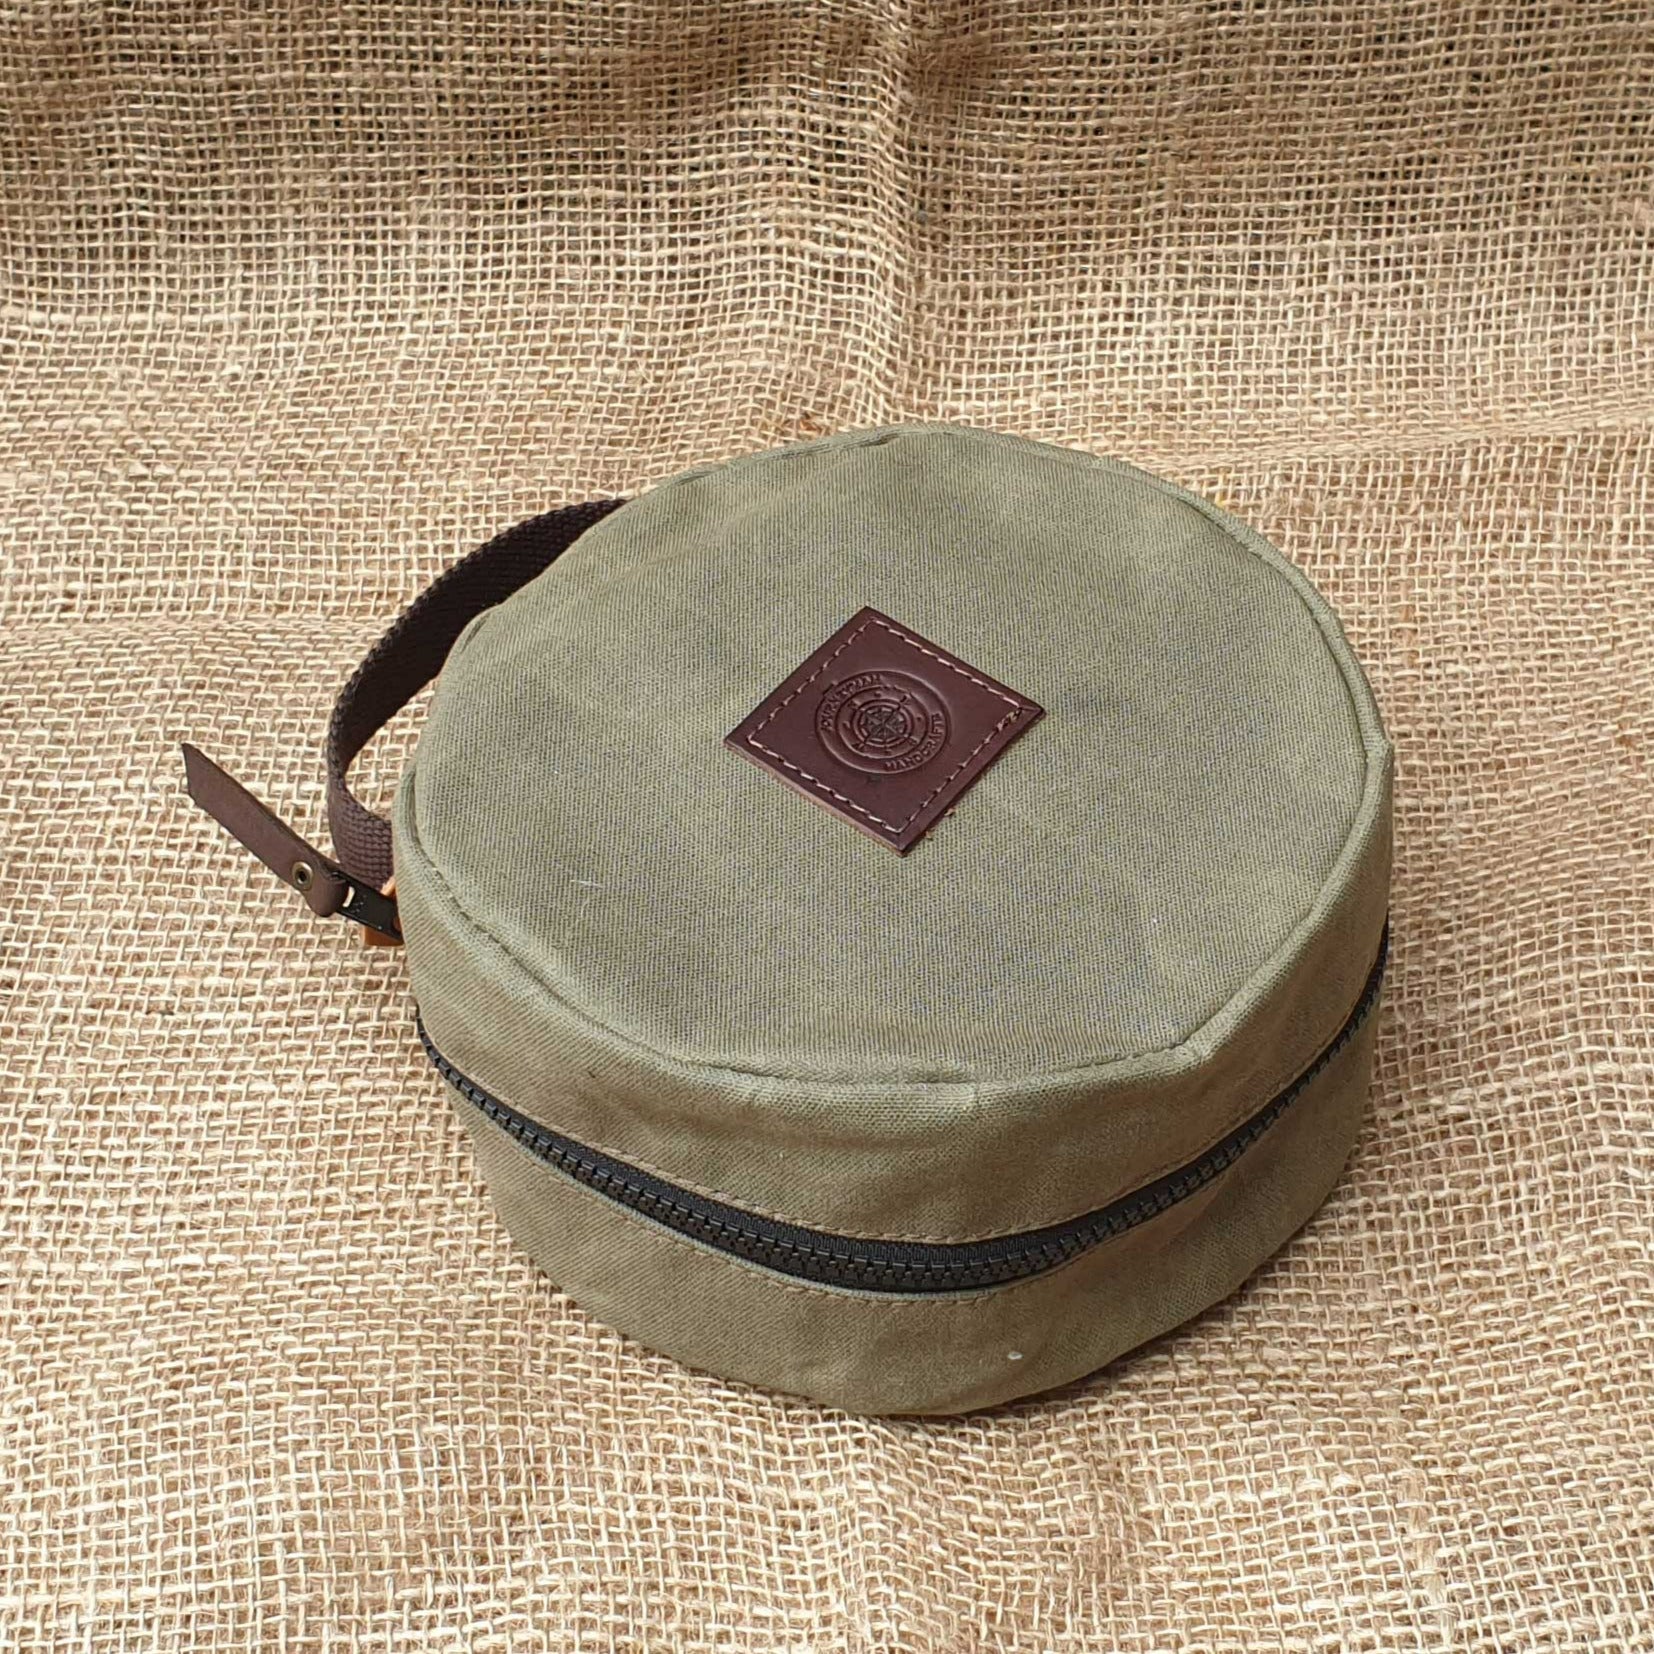 Skillet or Frying Pan Pouch Wax Canvas